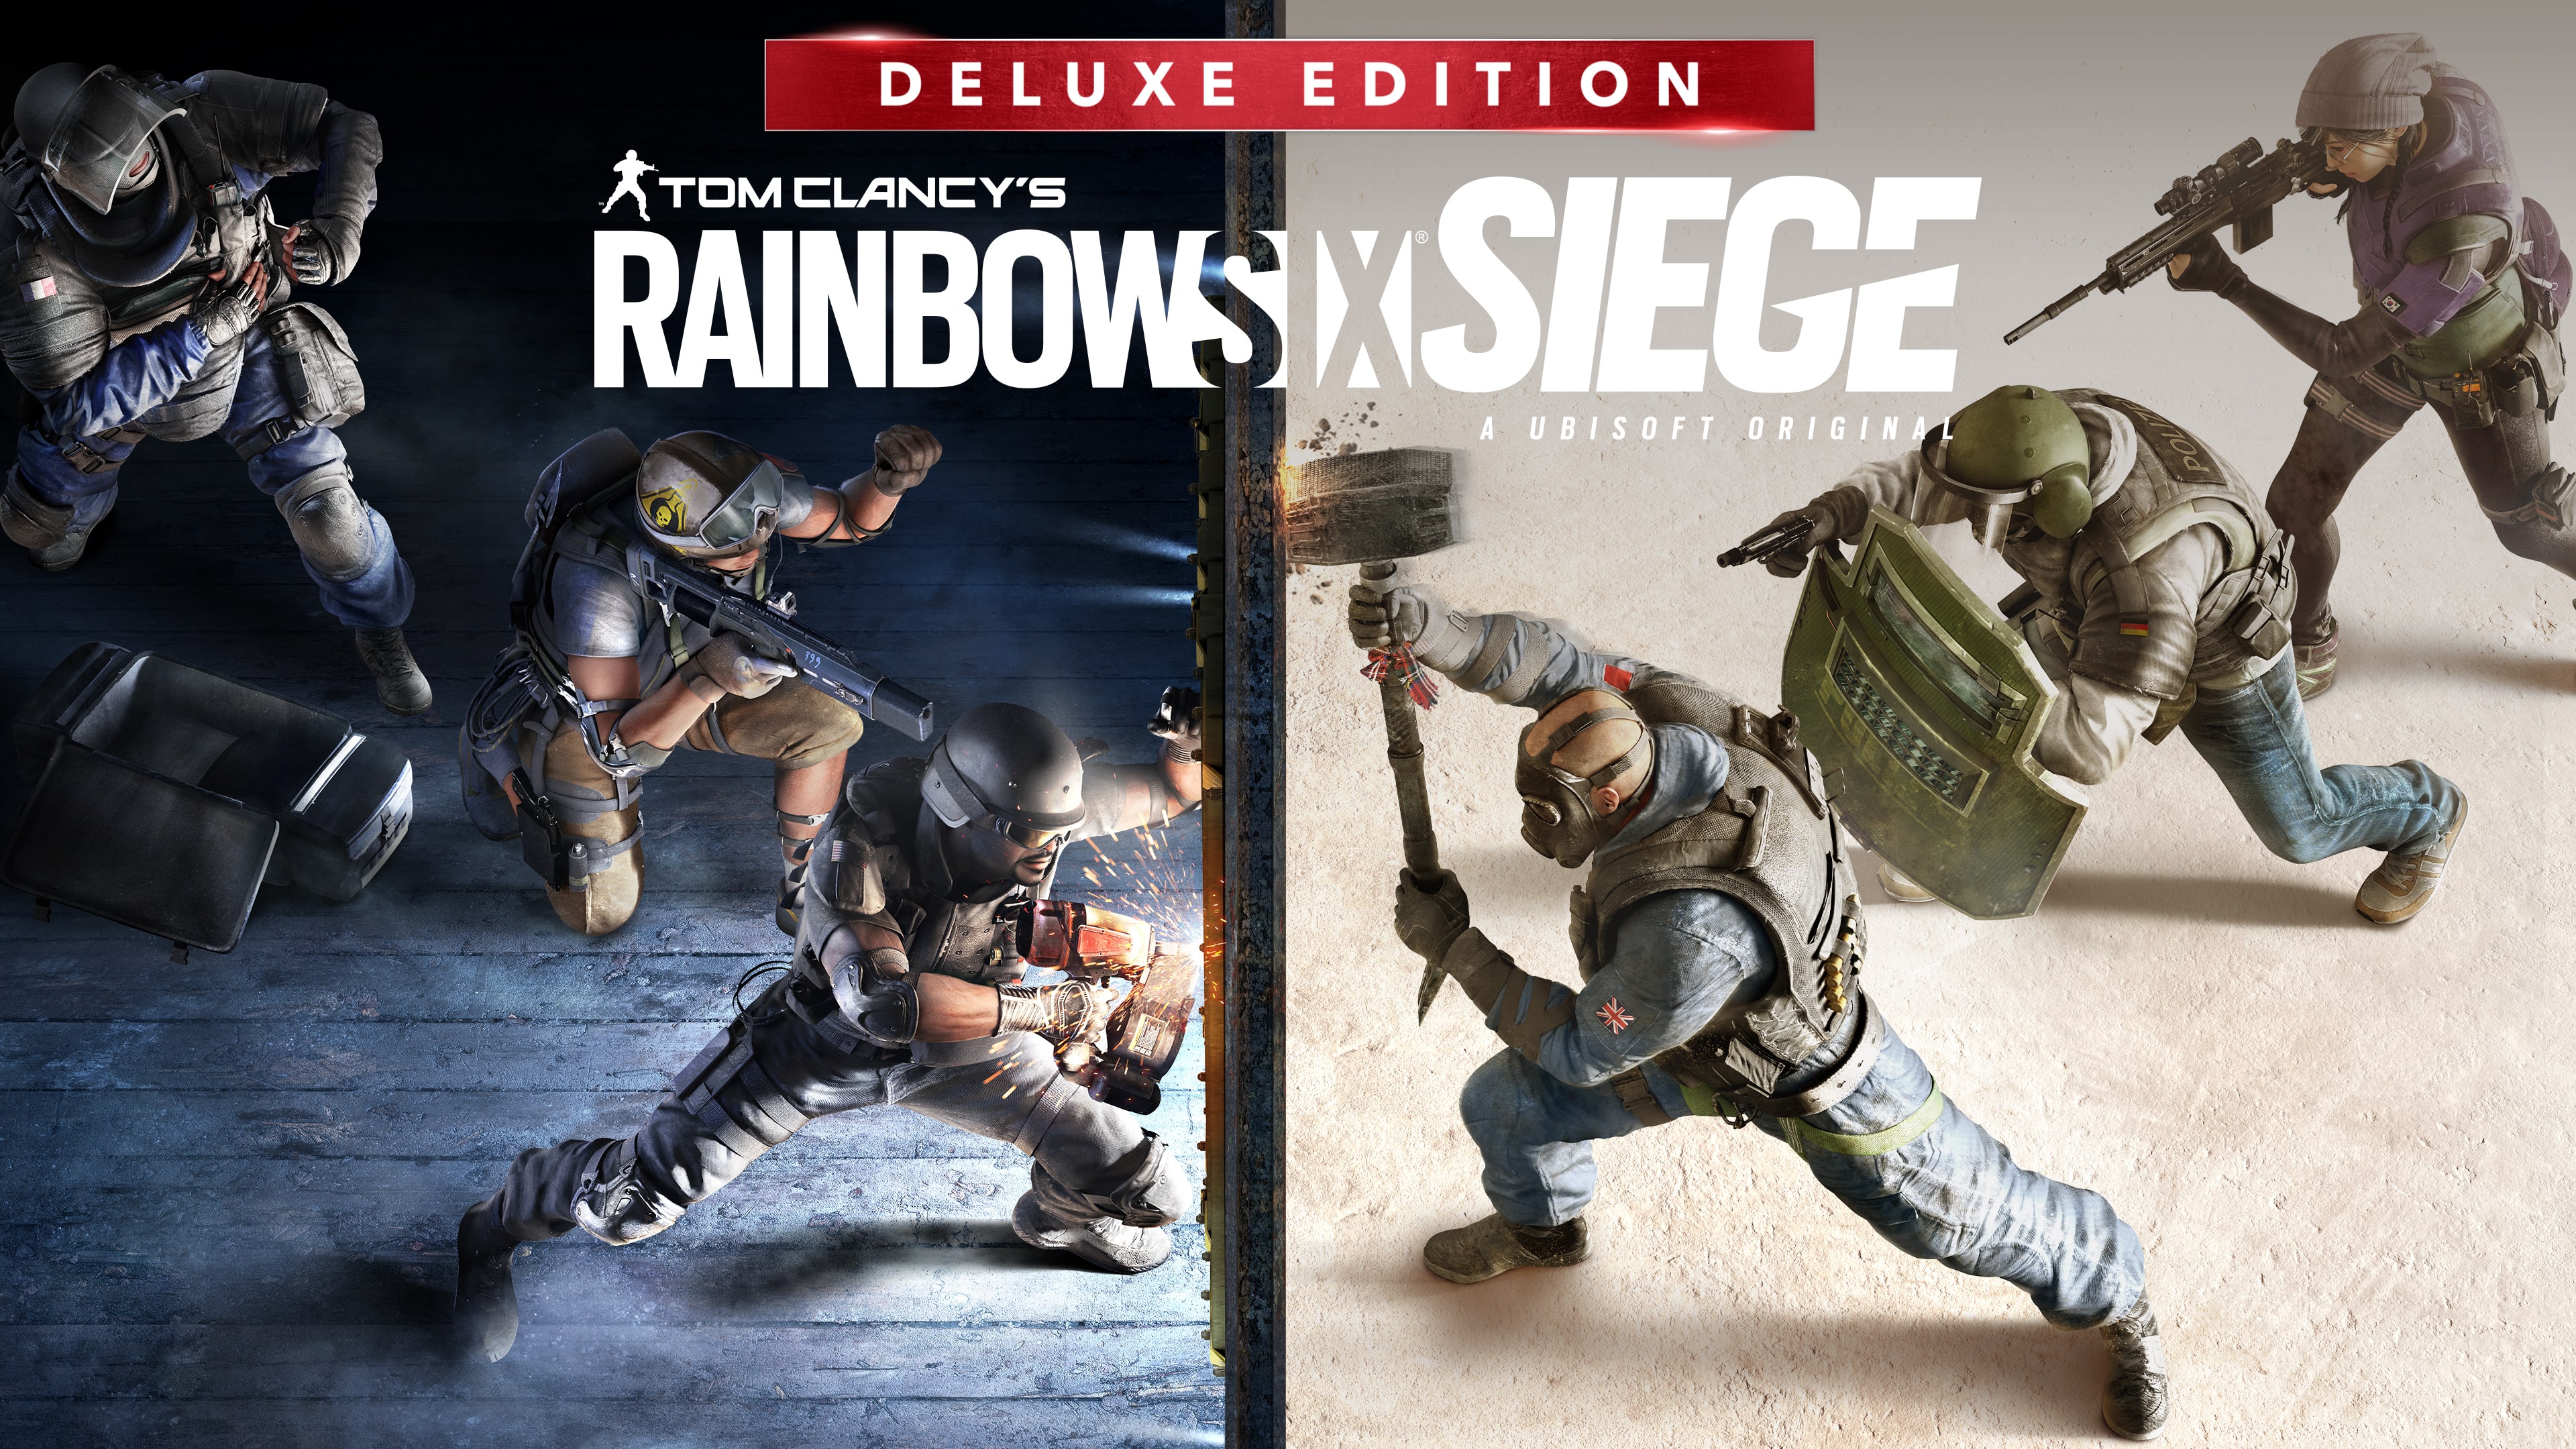 Tom Clancy's Rainbow Six® Siege Deluxe Edition (Simplified Chinese, English, Korean, Thai, Japanese, Traditional Chinese)